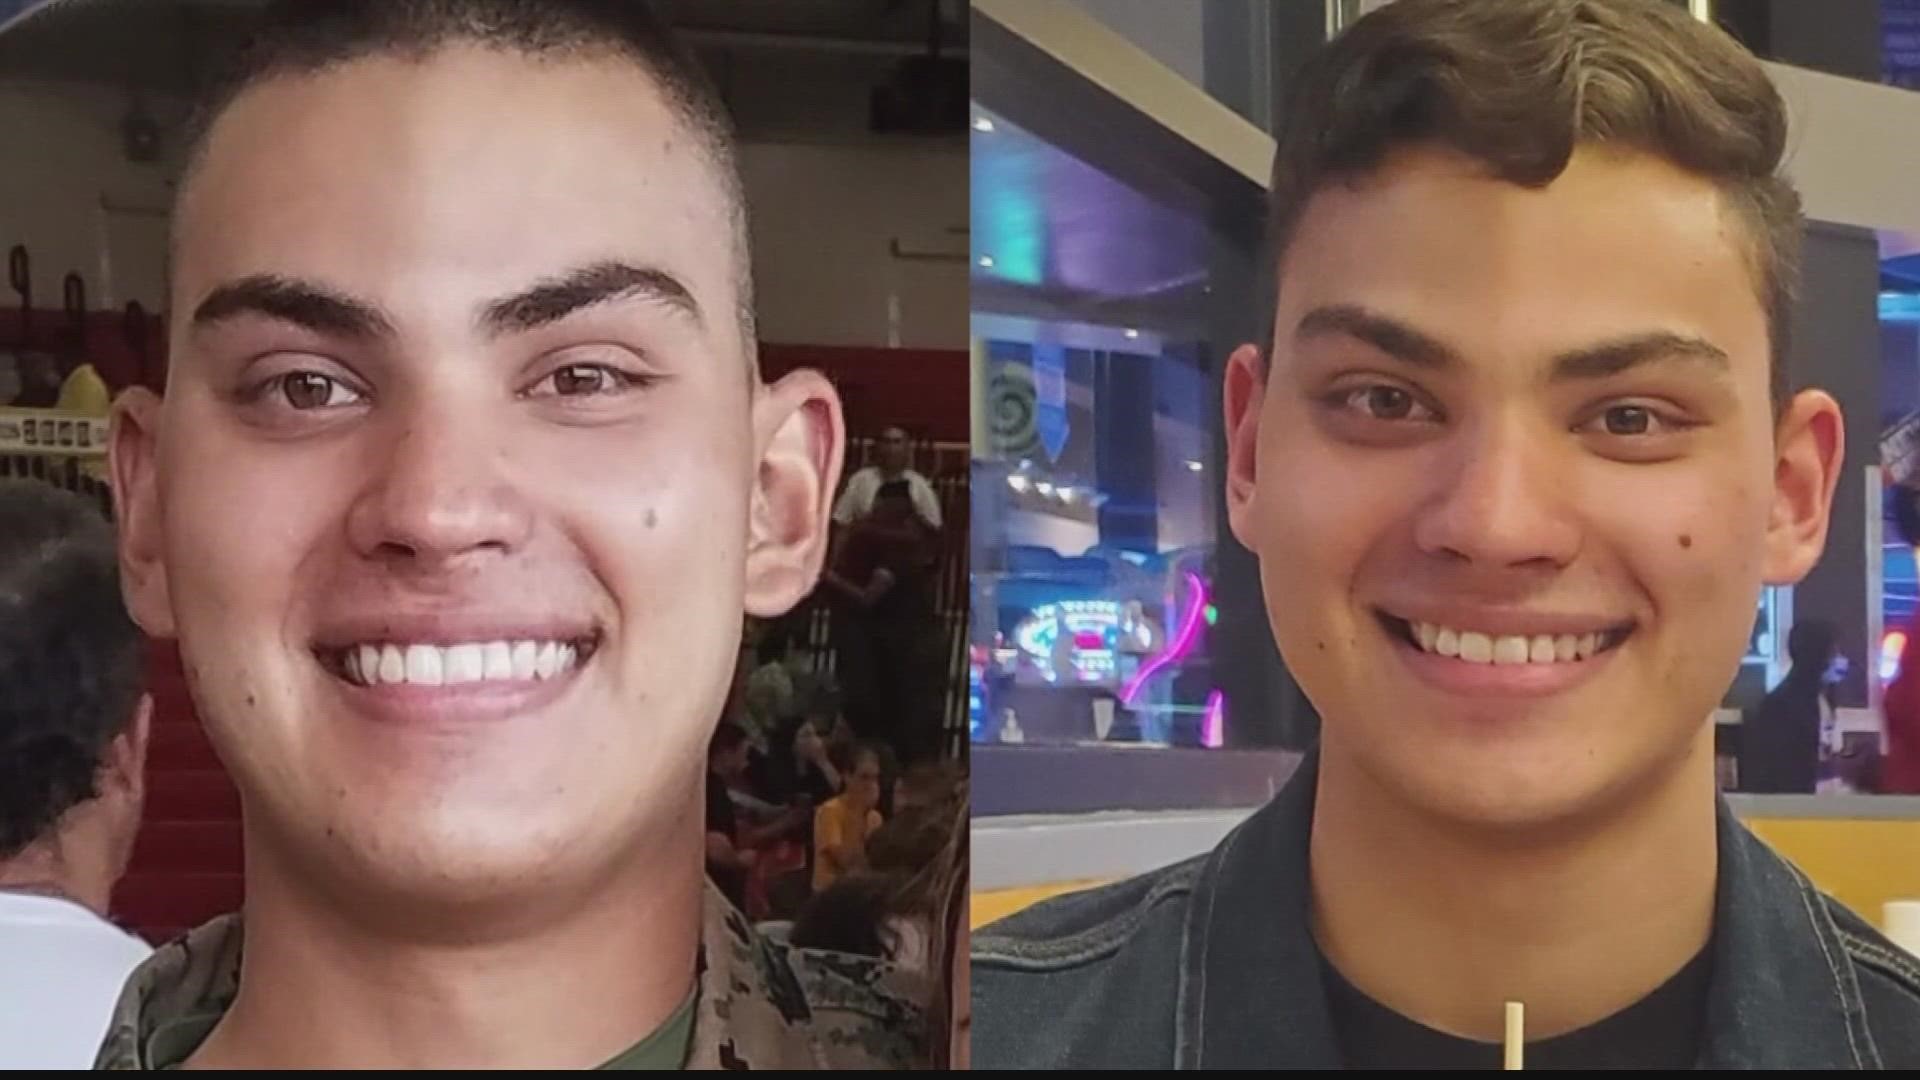 The Defense Department said Friday that Marine Lance Corporal Jonathan Gierke, 19, of Lawrenceville and another Marine were killed when a vehicle overturned.